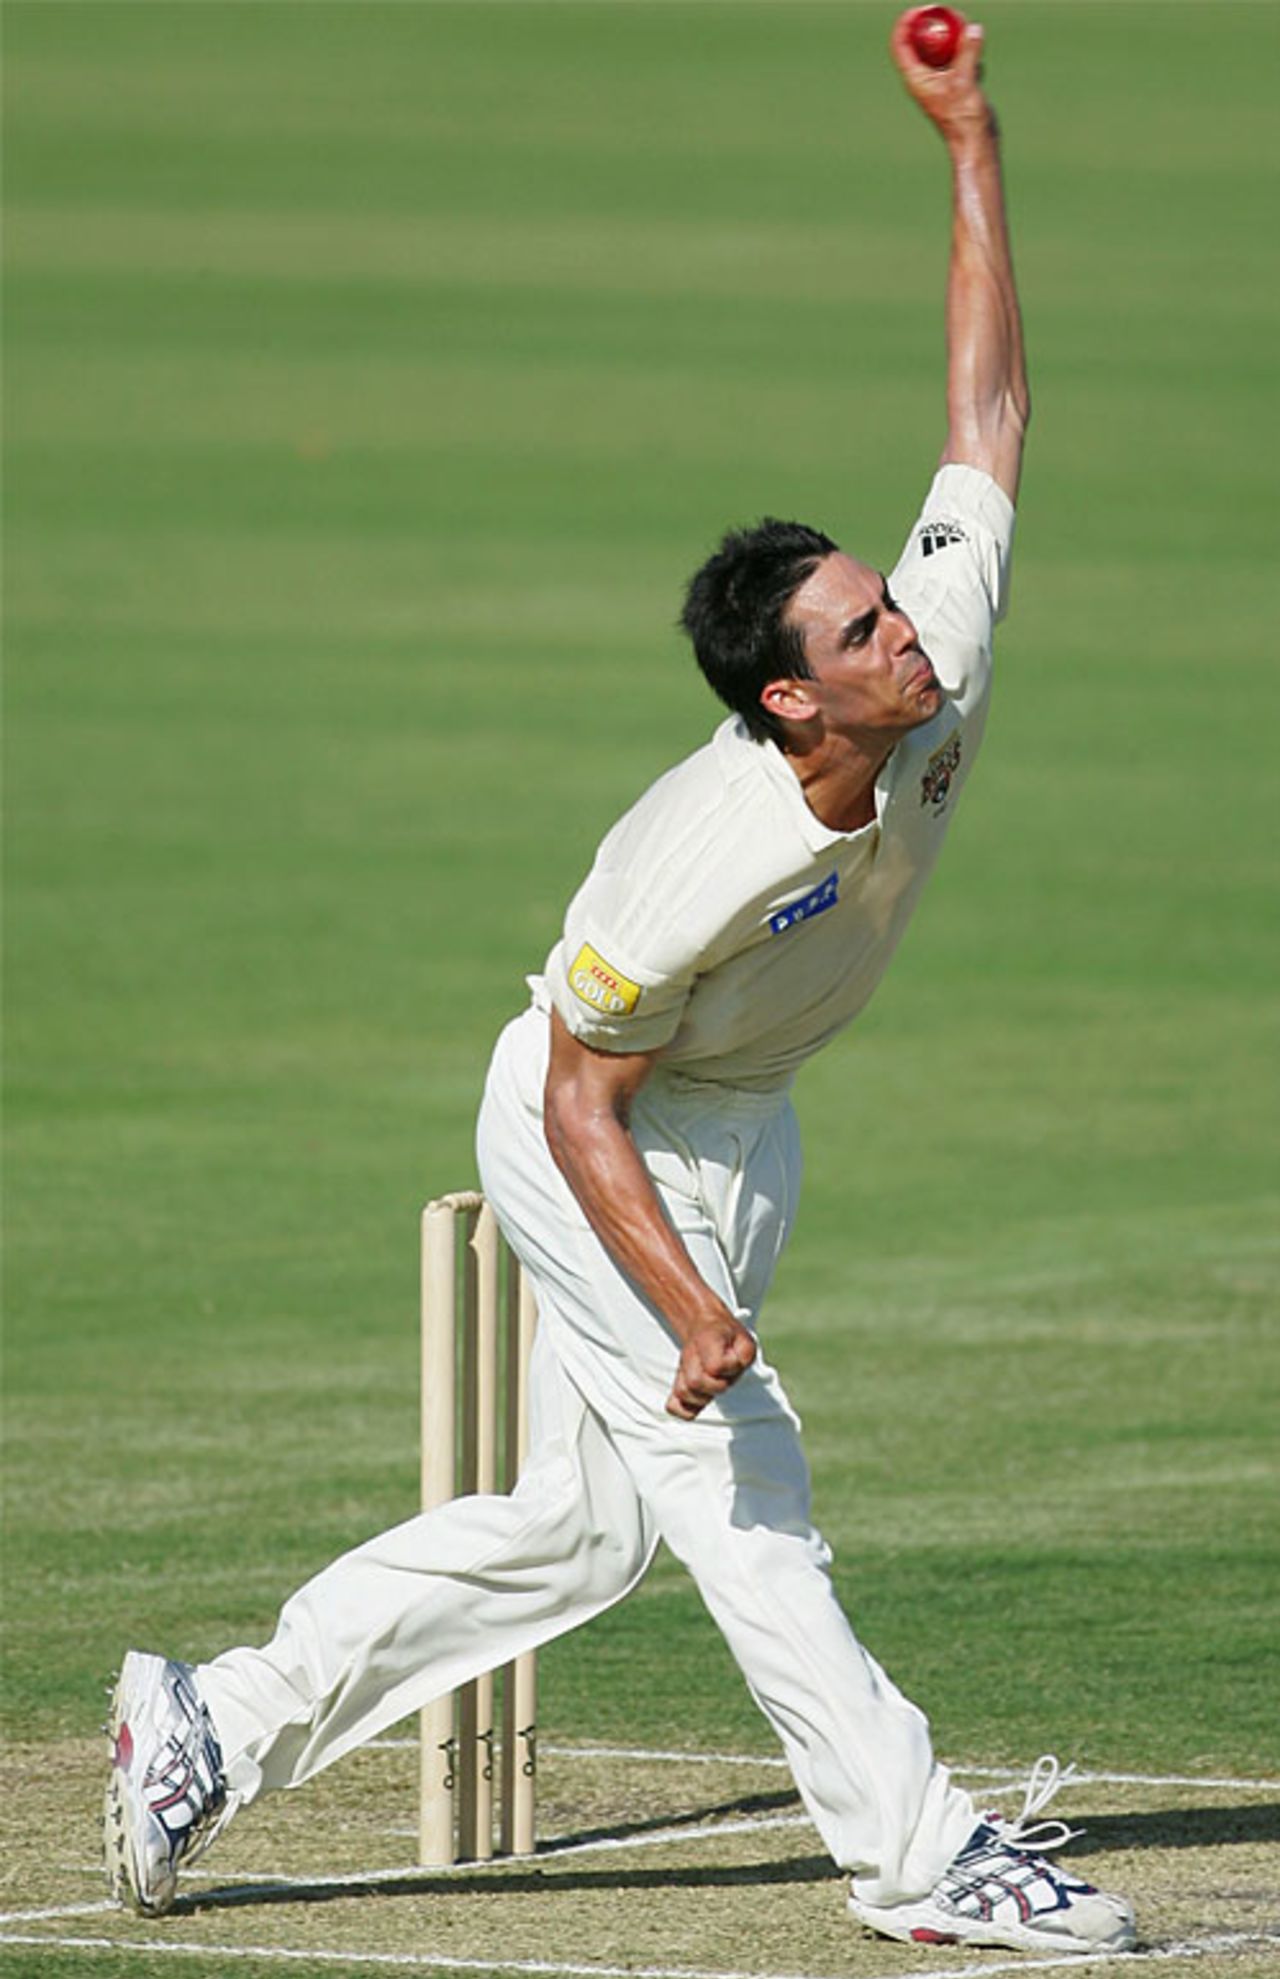 Mitchell Johnson bowling during the second innings, Queensland v Sri Lankans, 2nd day, Brisbane, November 3, 2007